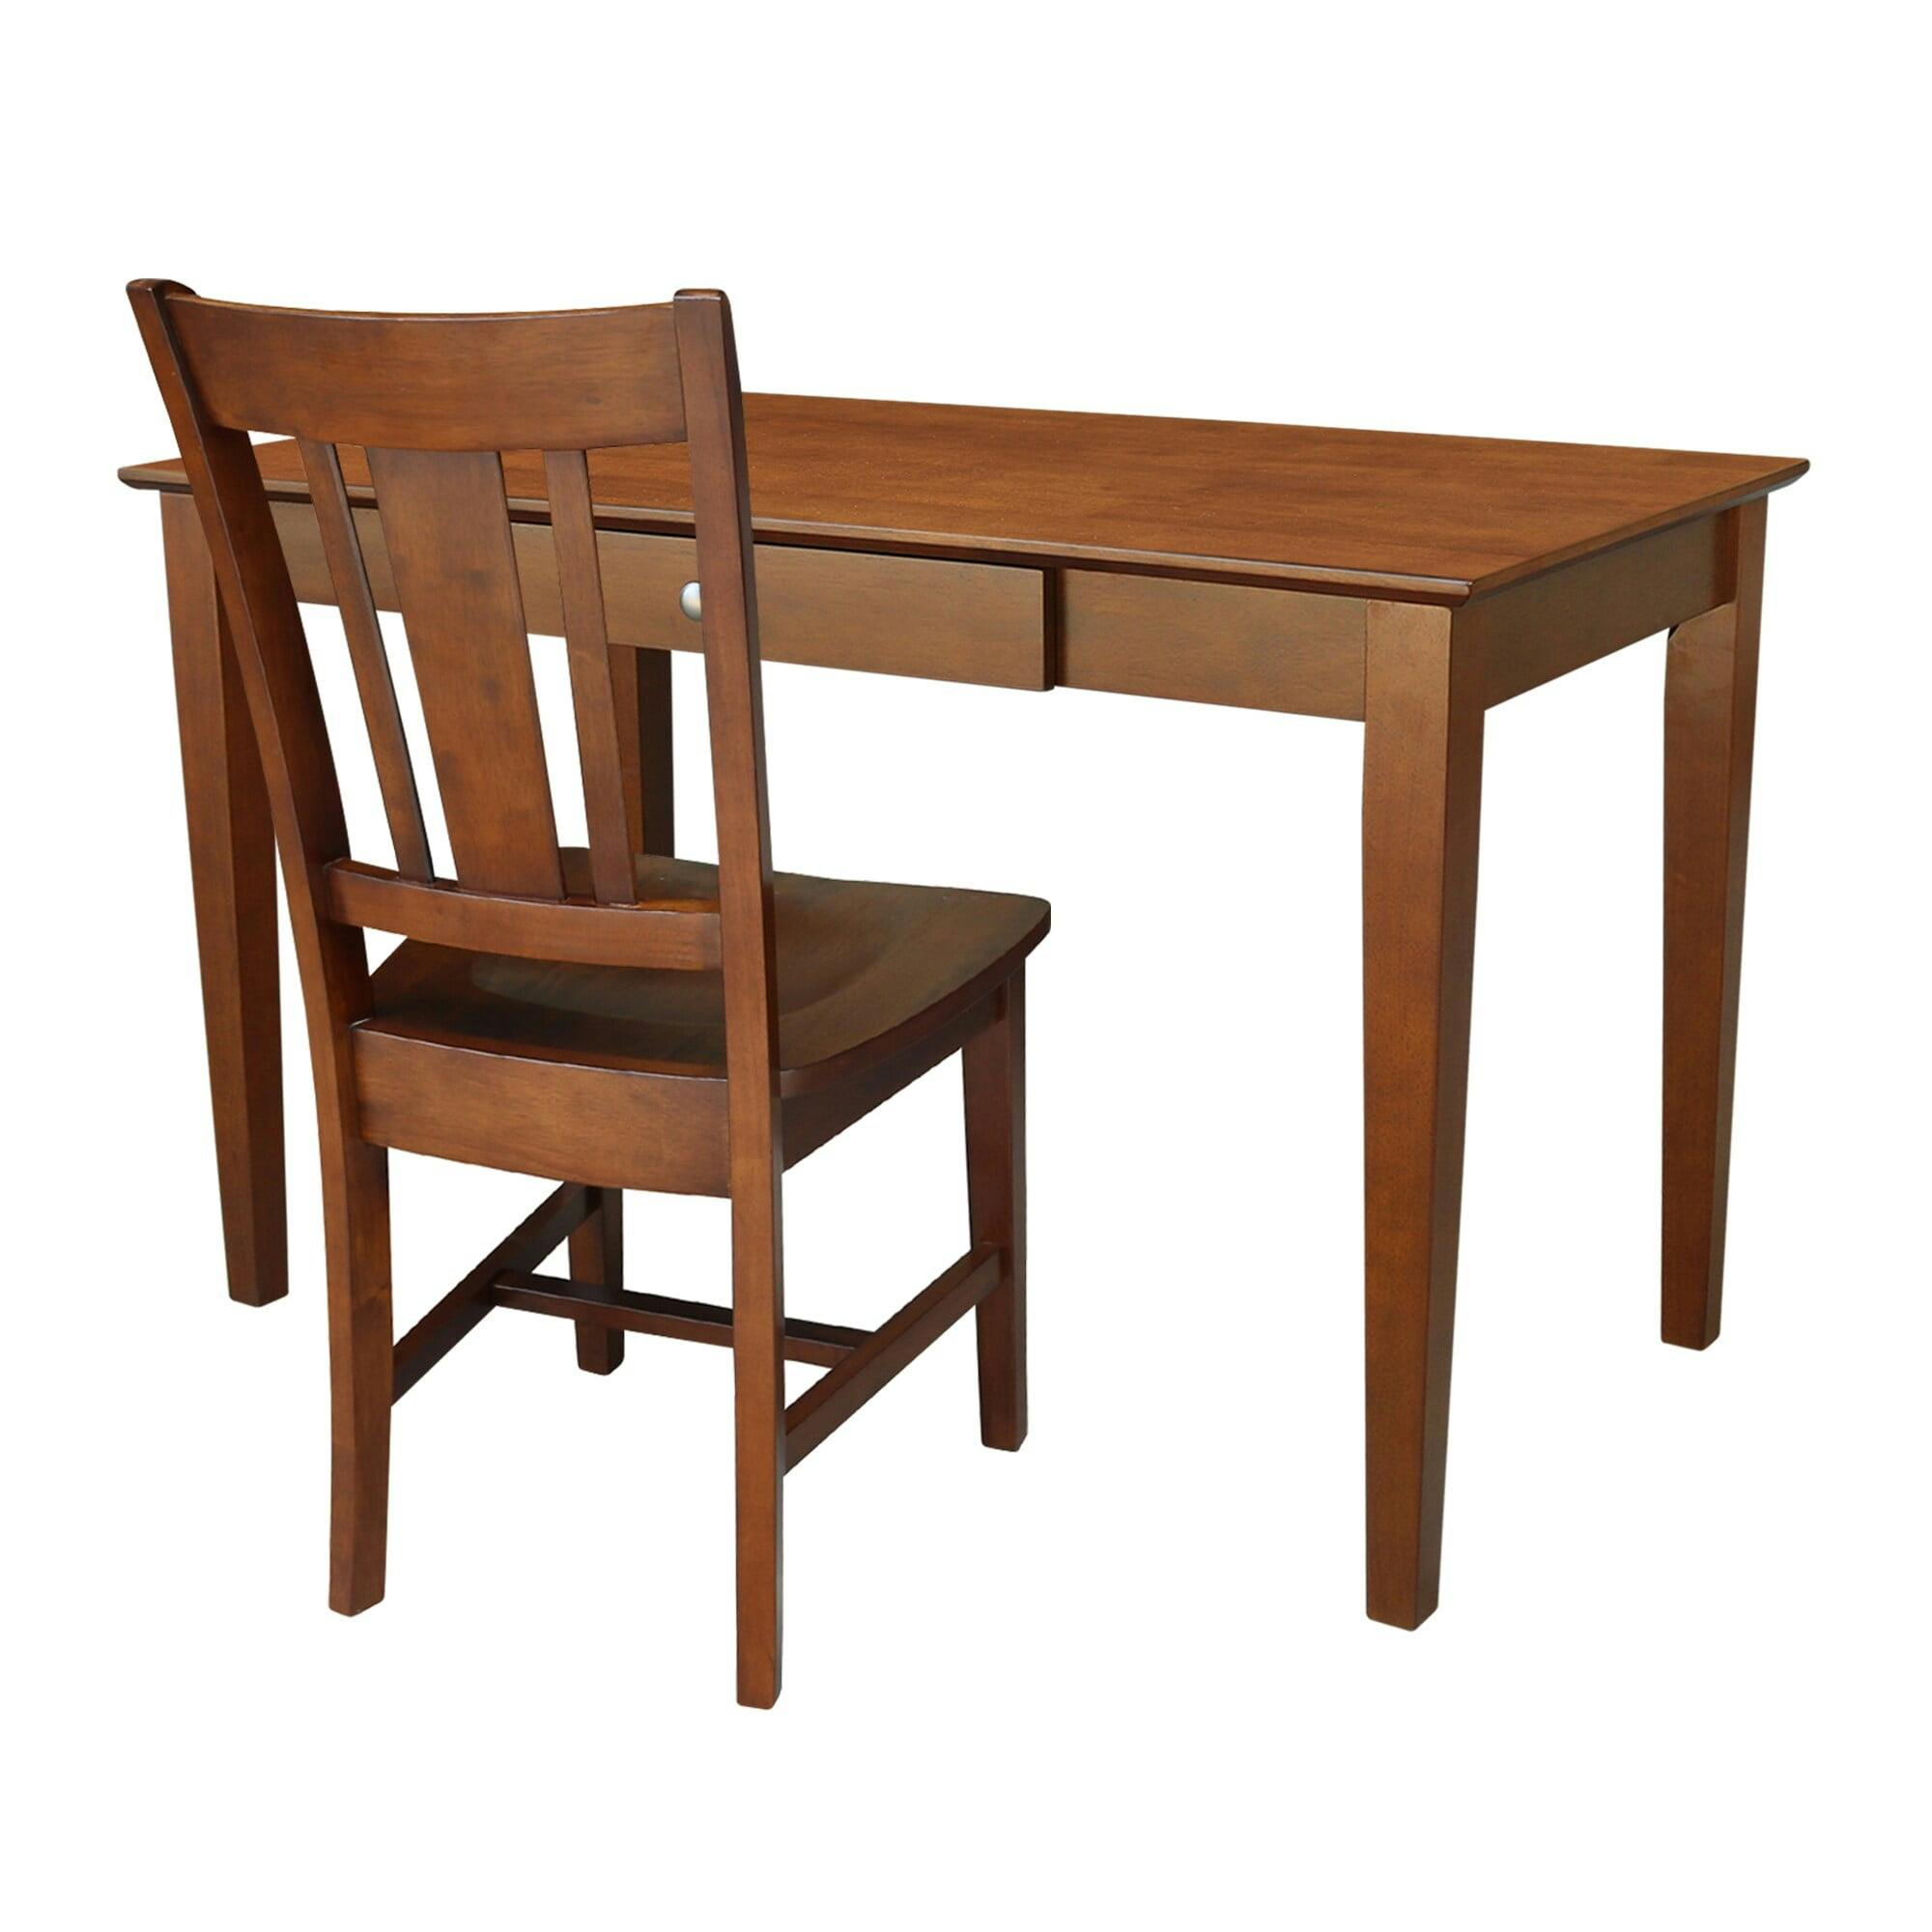 Elegant Espresso Solid Wood Desk and Chair Set with Spacious Drawer